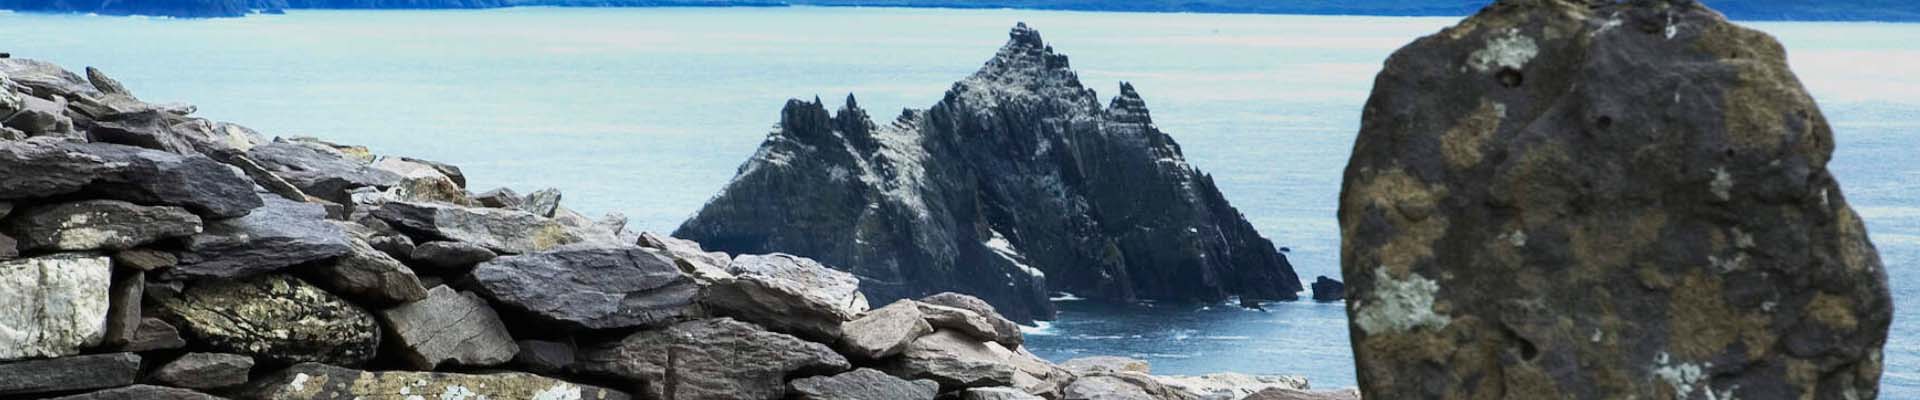 skellig michael on the west coast of ireland featured in star wars